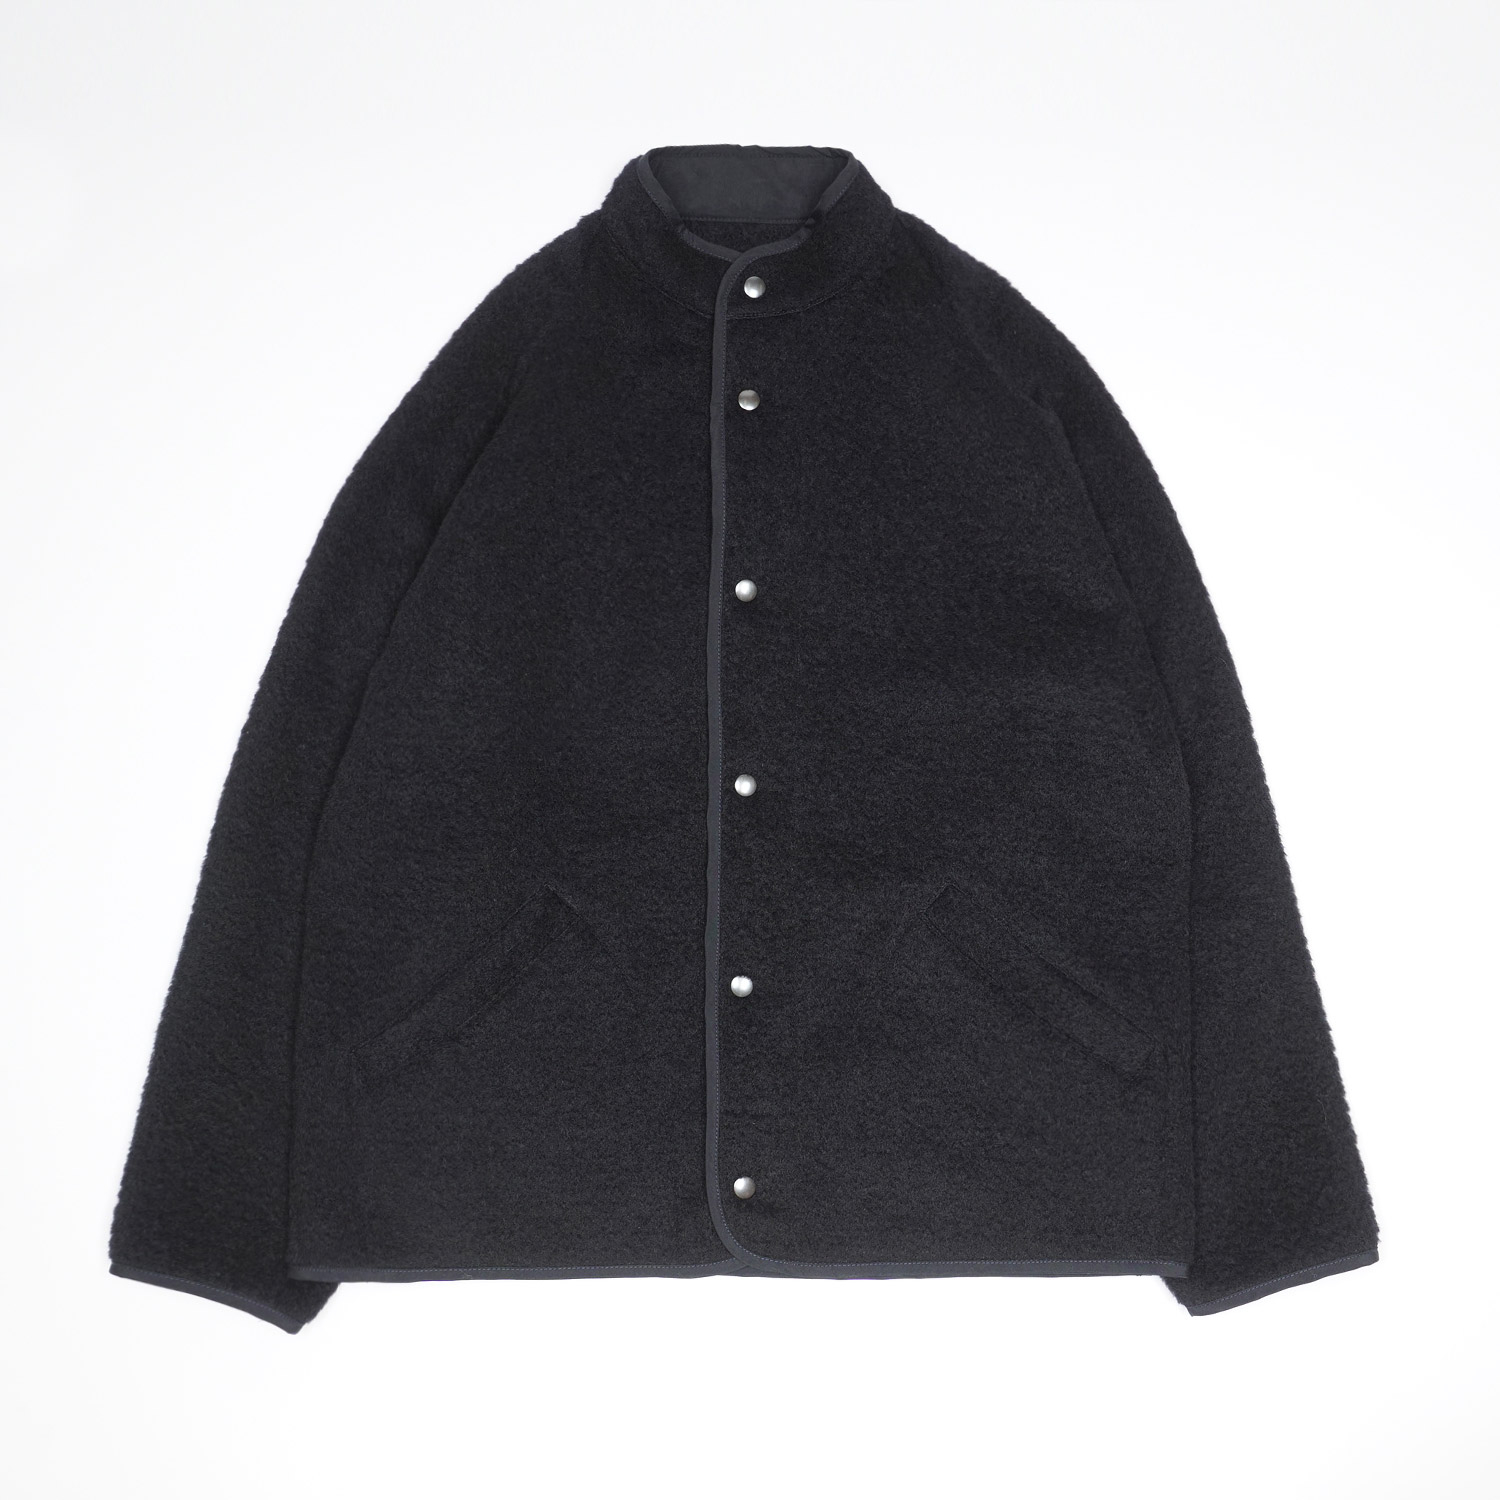 CONTOUR Jacket in Midnight blue color by Arpenteur